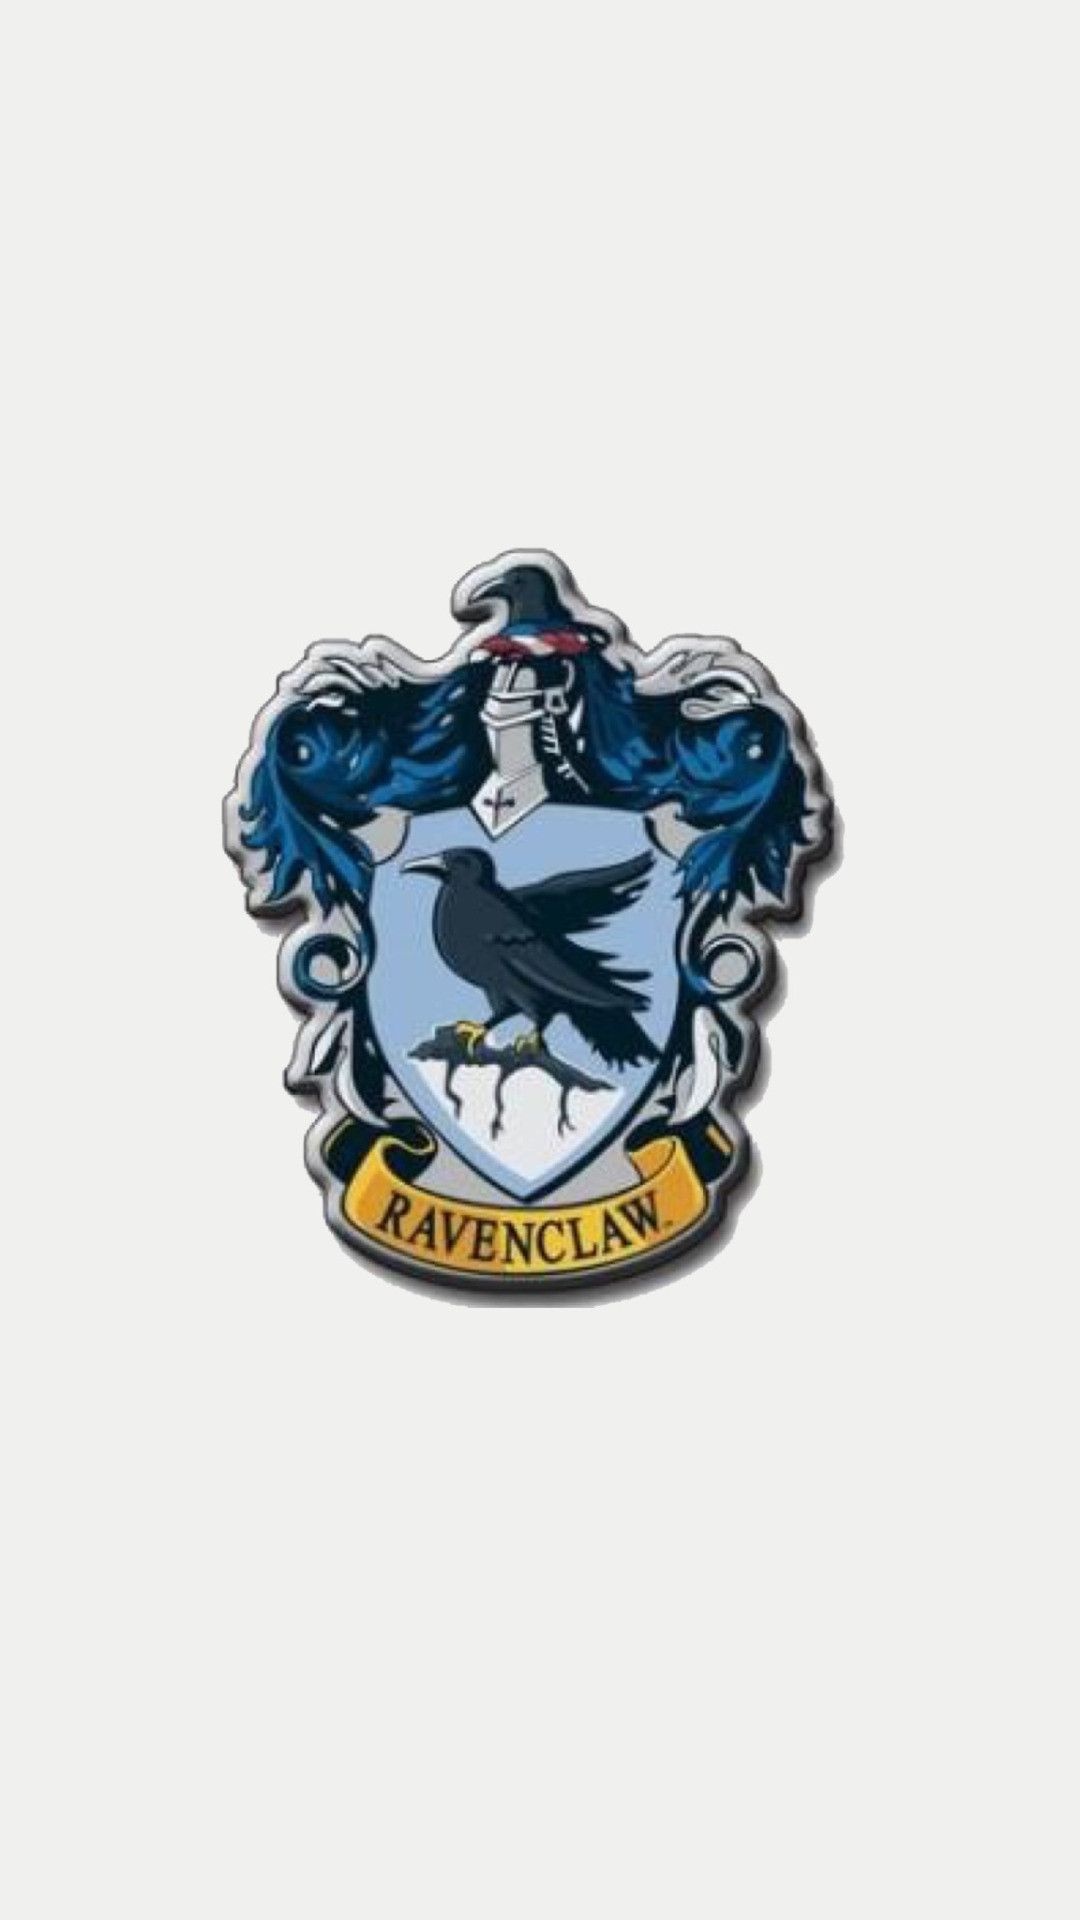 Ravenclaw iPhone 5s wallpapers, Unique designs, House pride, Mobile backgrounds, 1080x1920 Full HD Phone